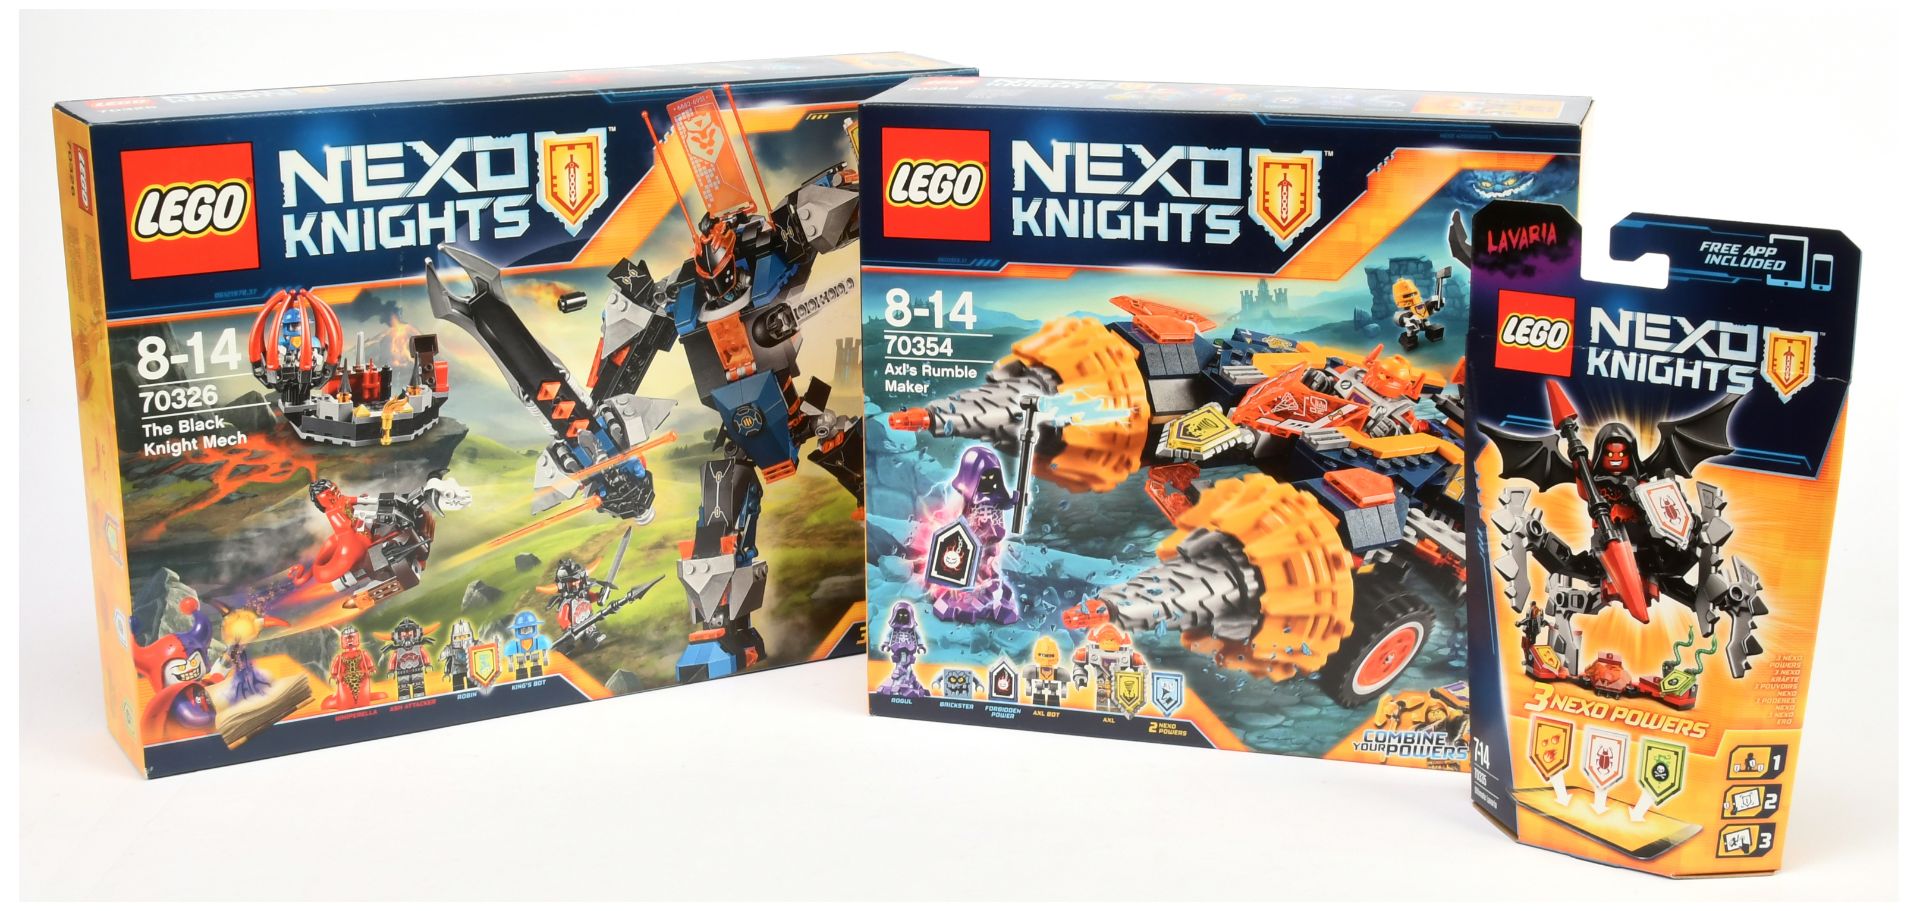 Lego Nexo Knights sets x3 Includes The Black Knight Mech 70326, Axl's Rumble Maker 70354, Lavaria...